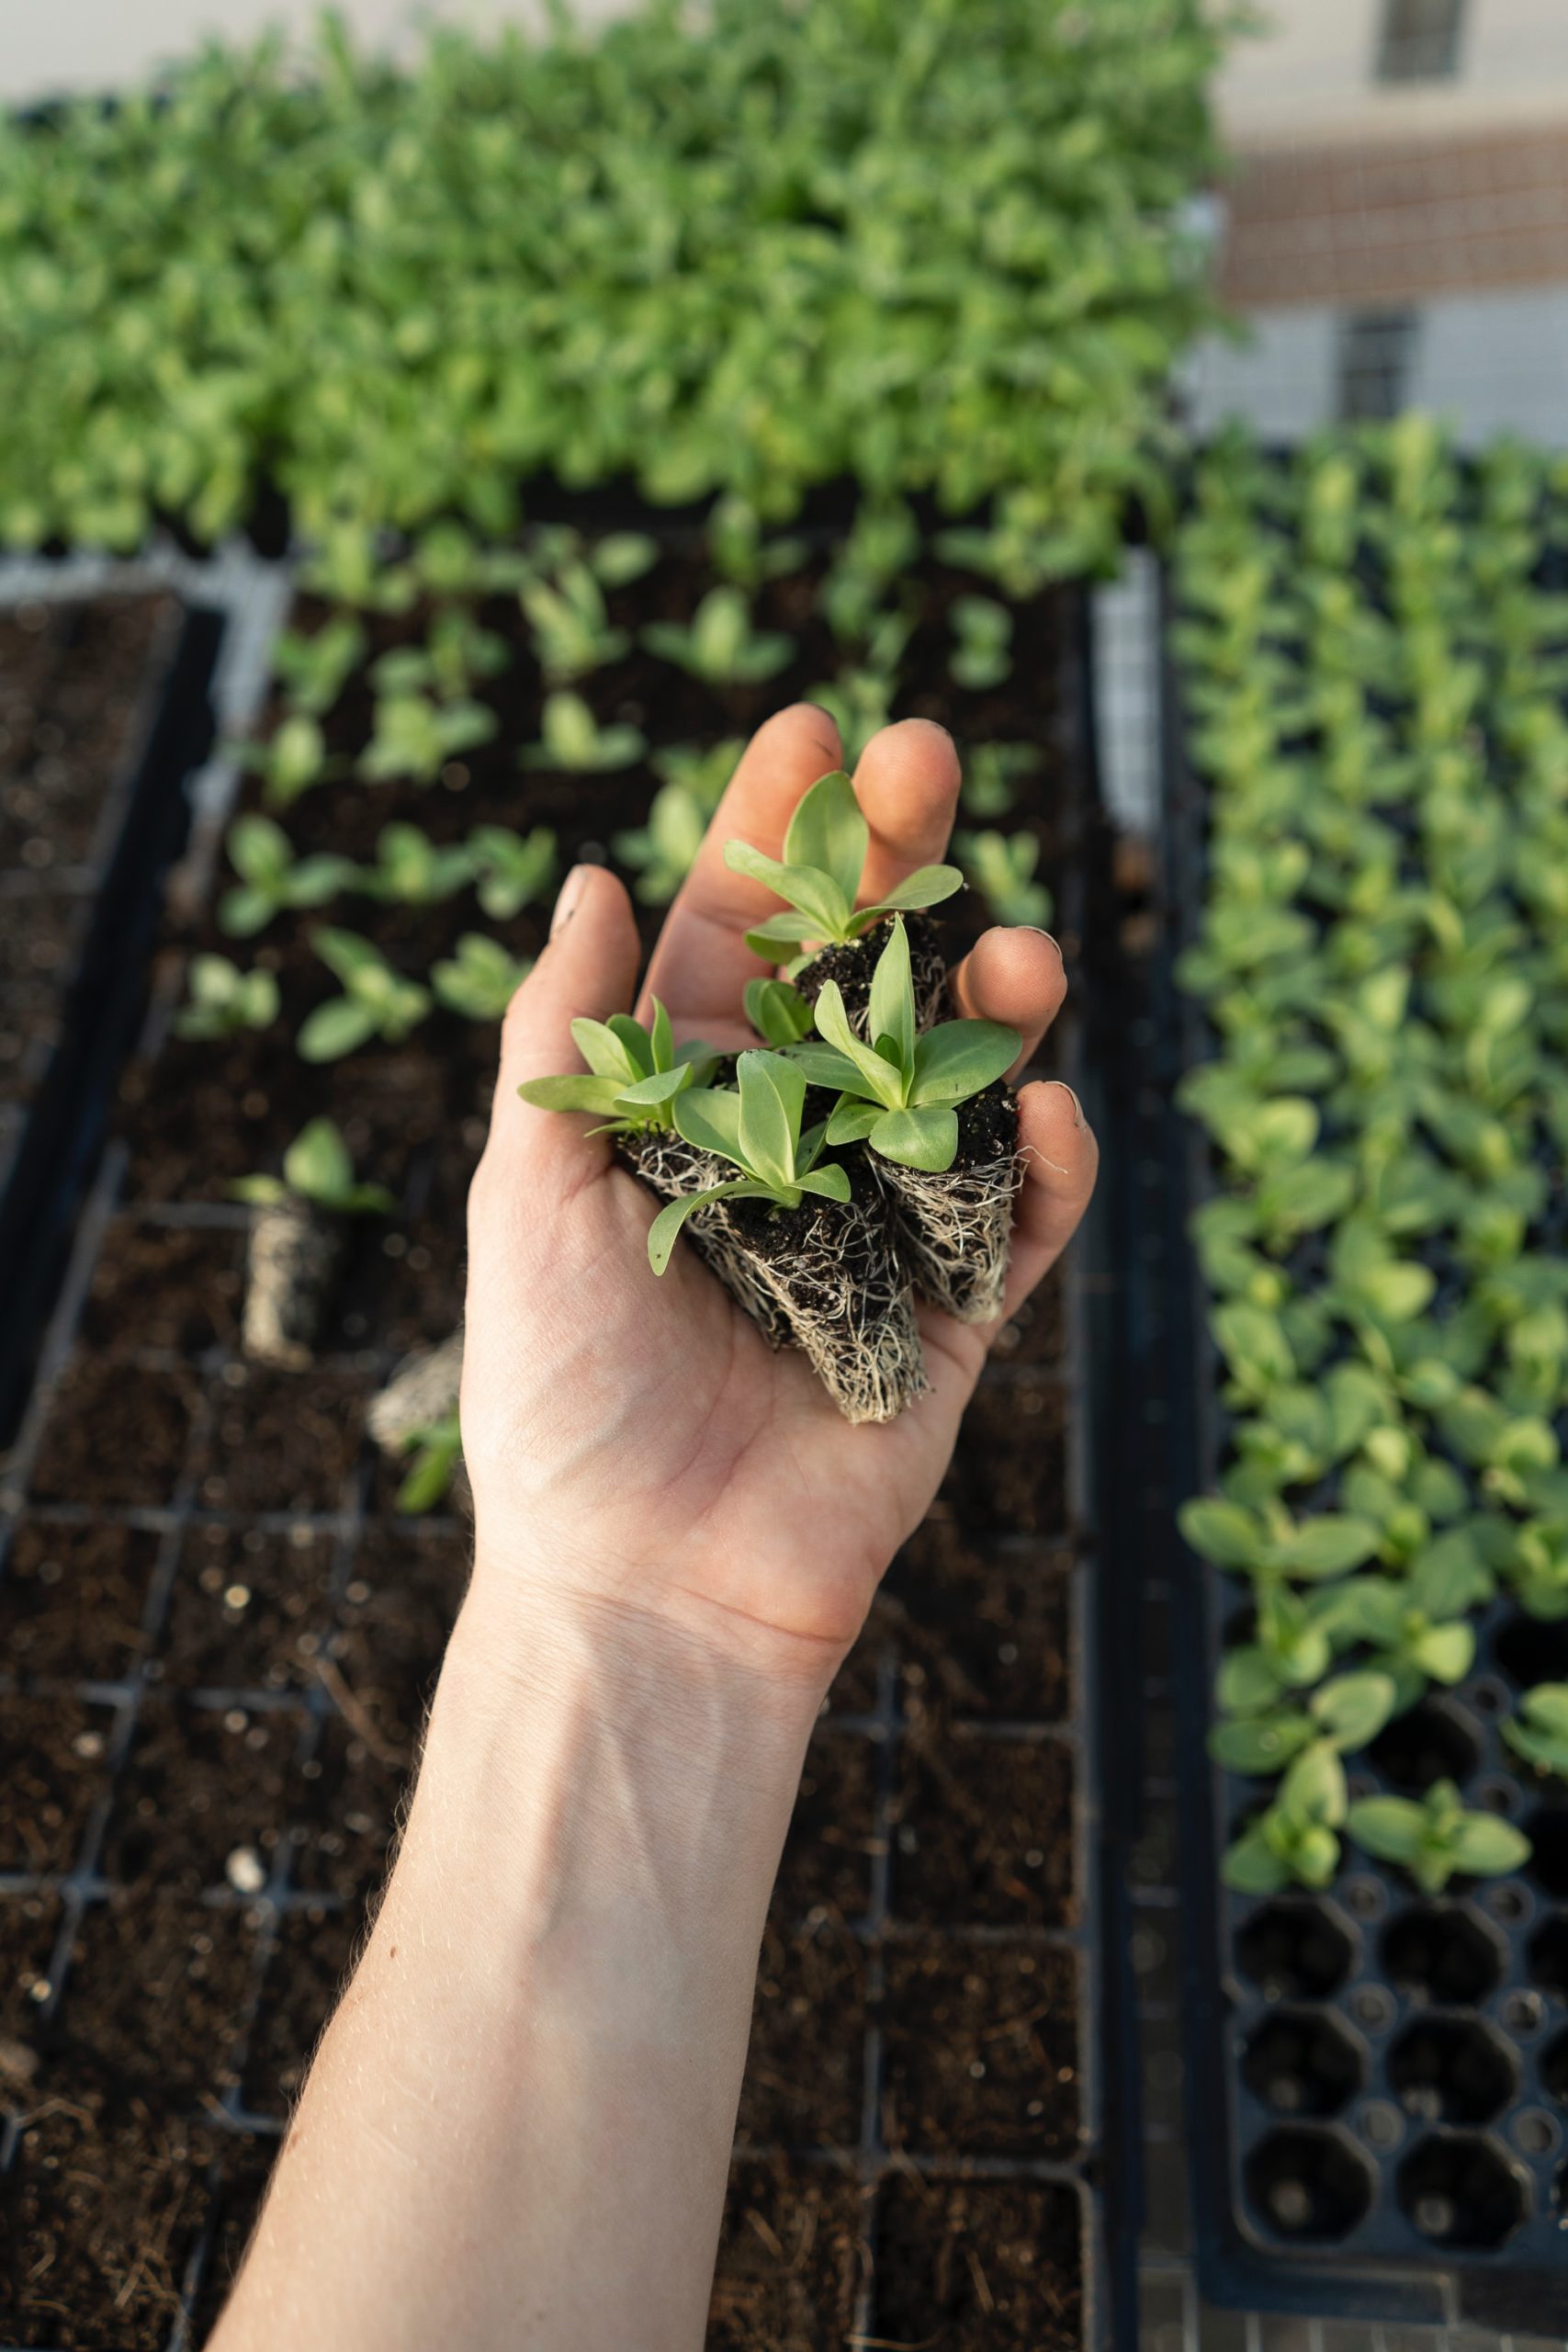 The Fundamentals of Hydroponics seedlings in hand